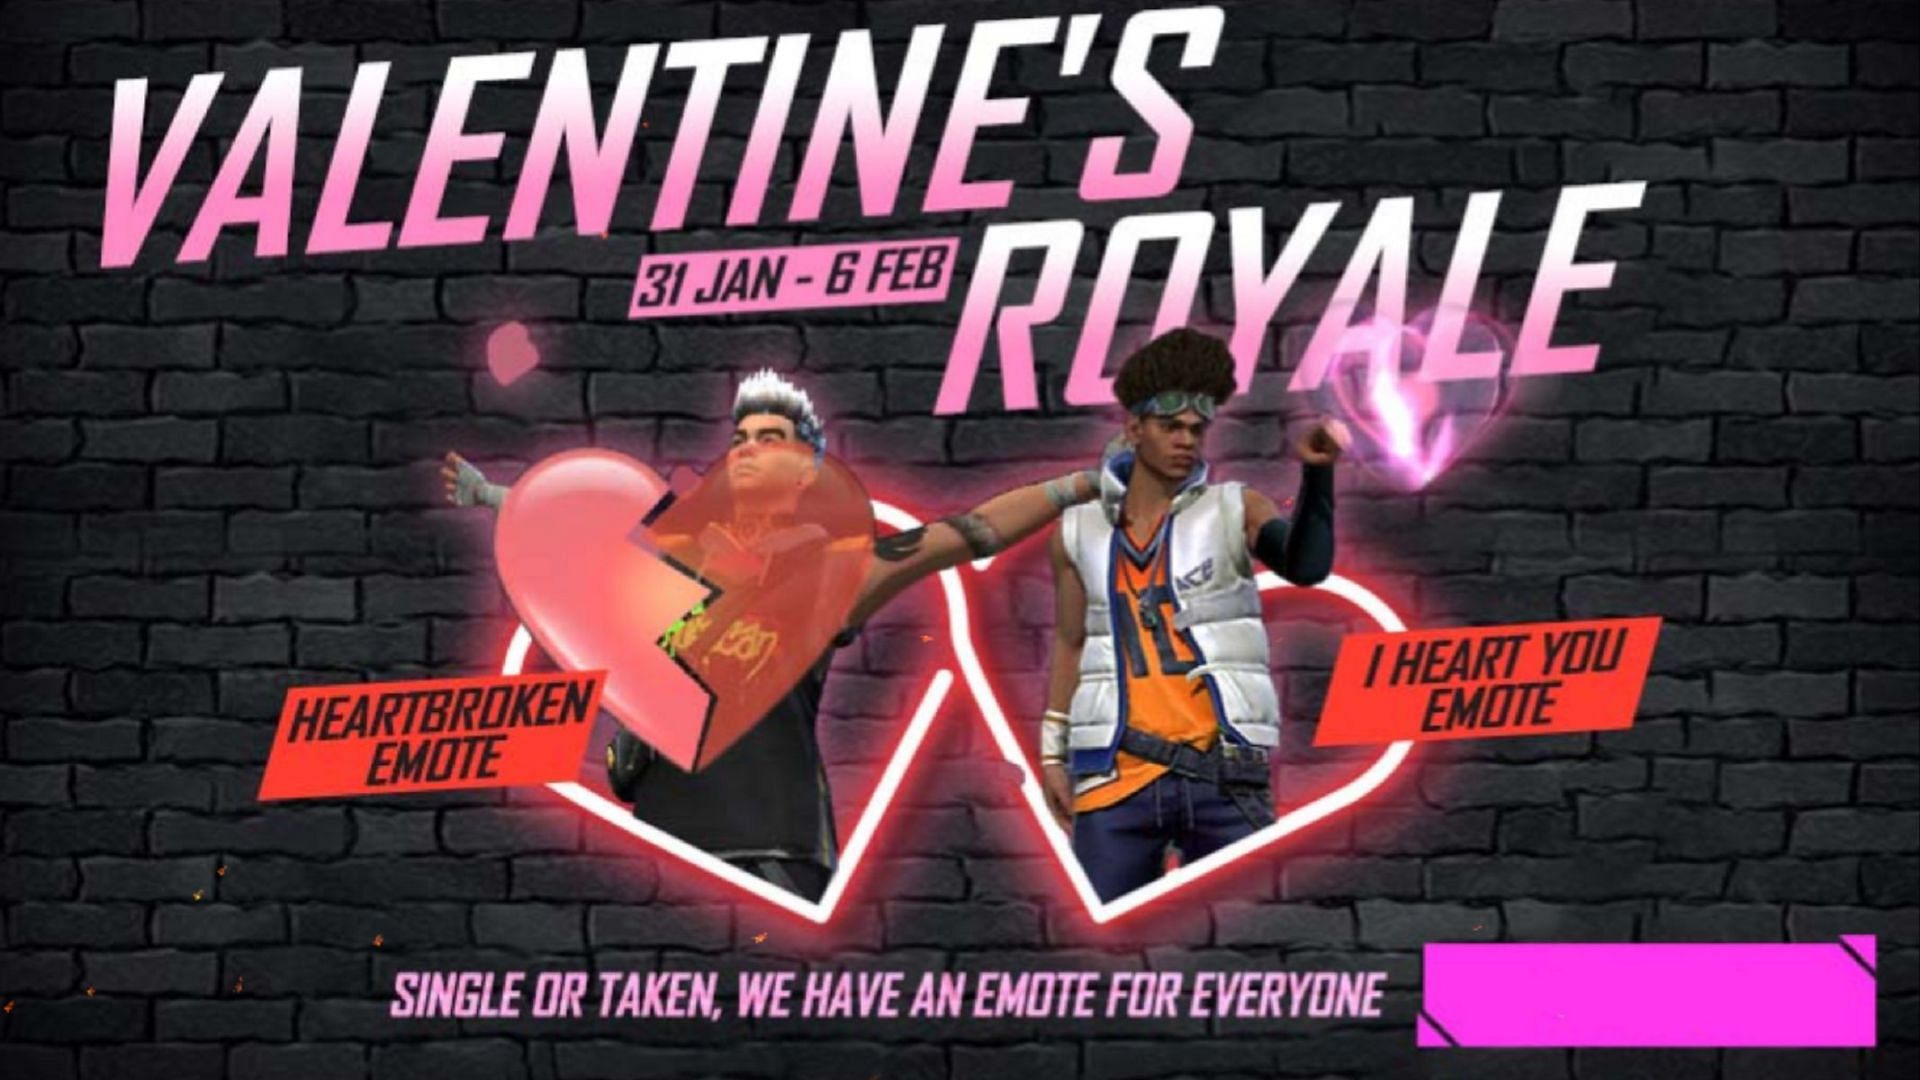 The event features two emotes (Image via Garena)